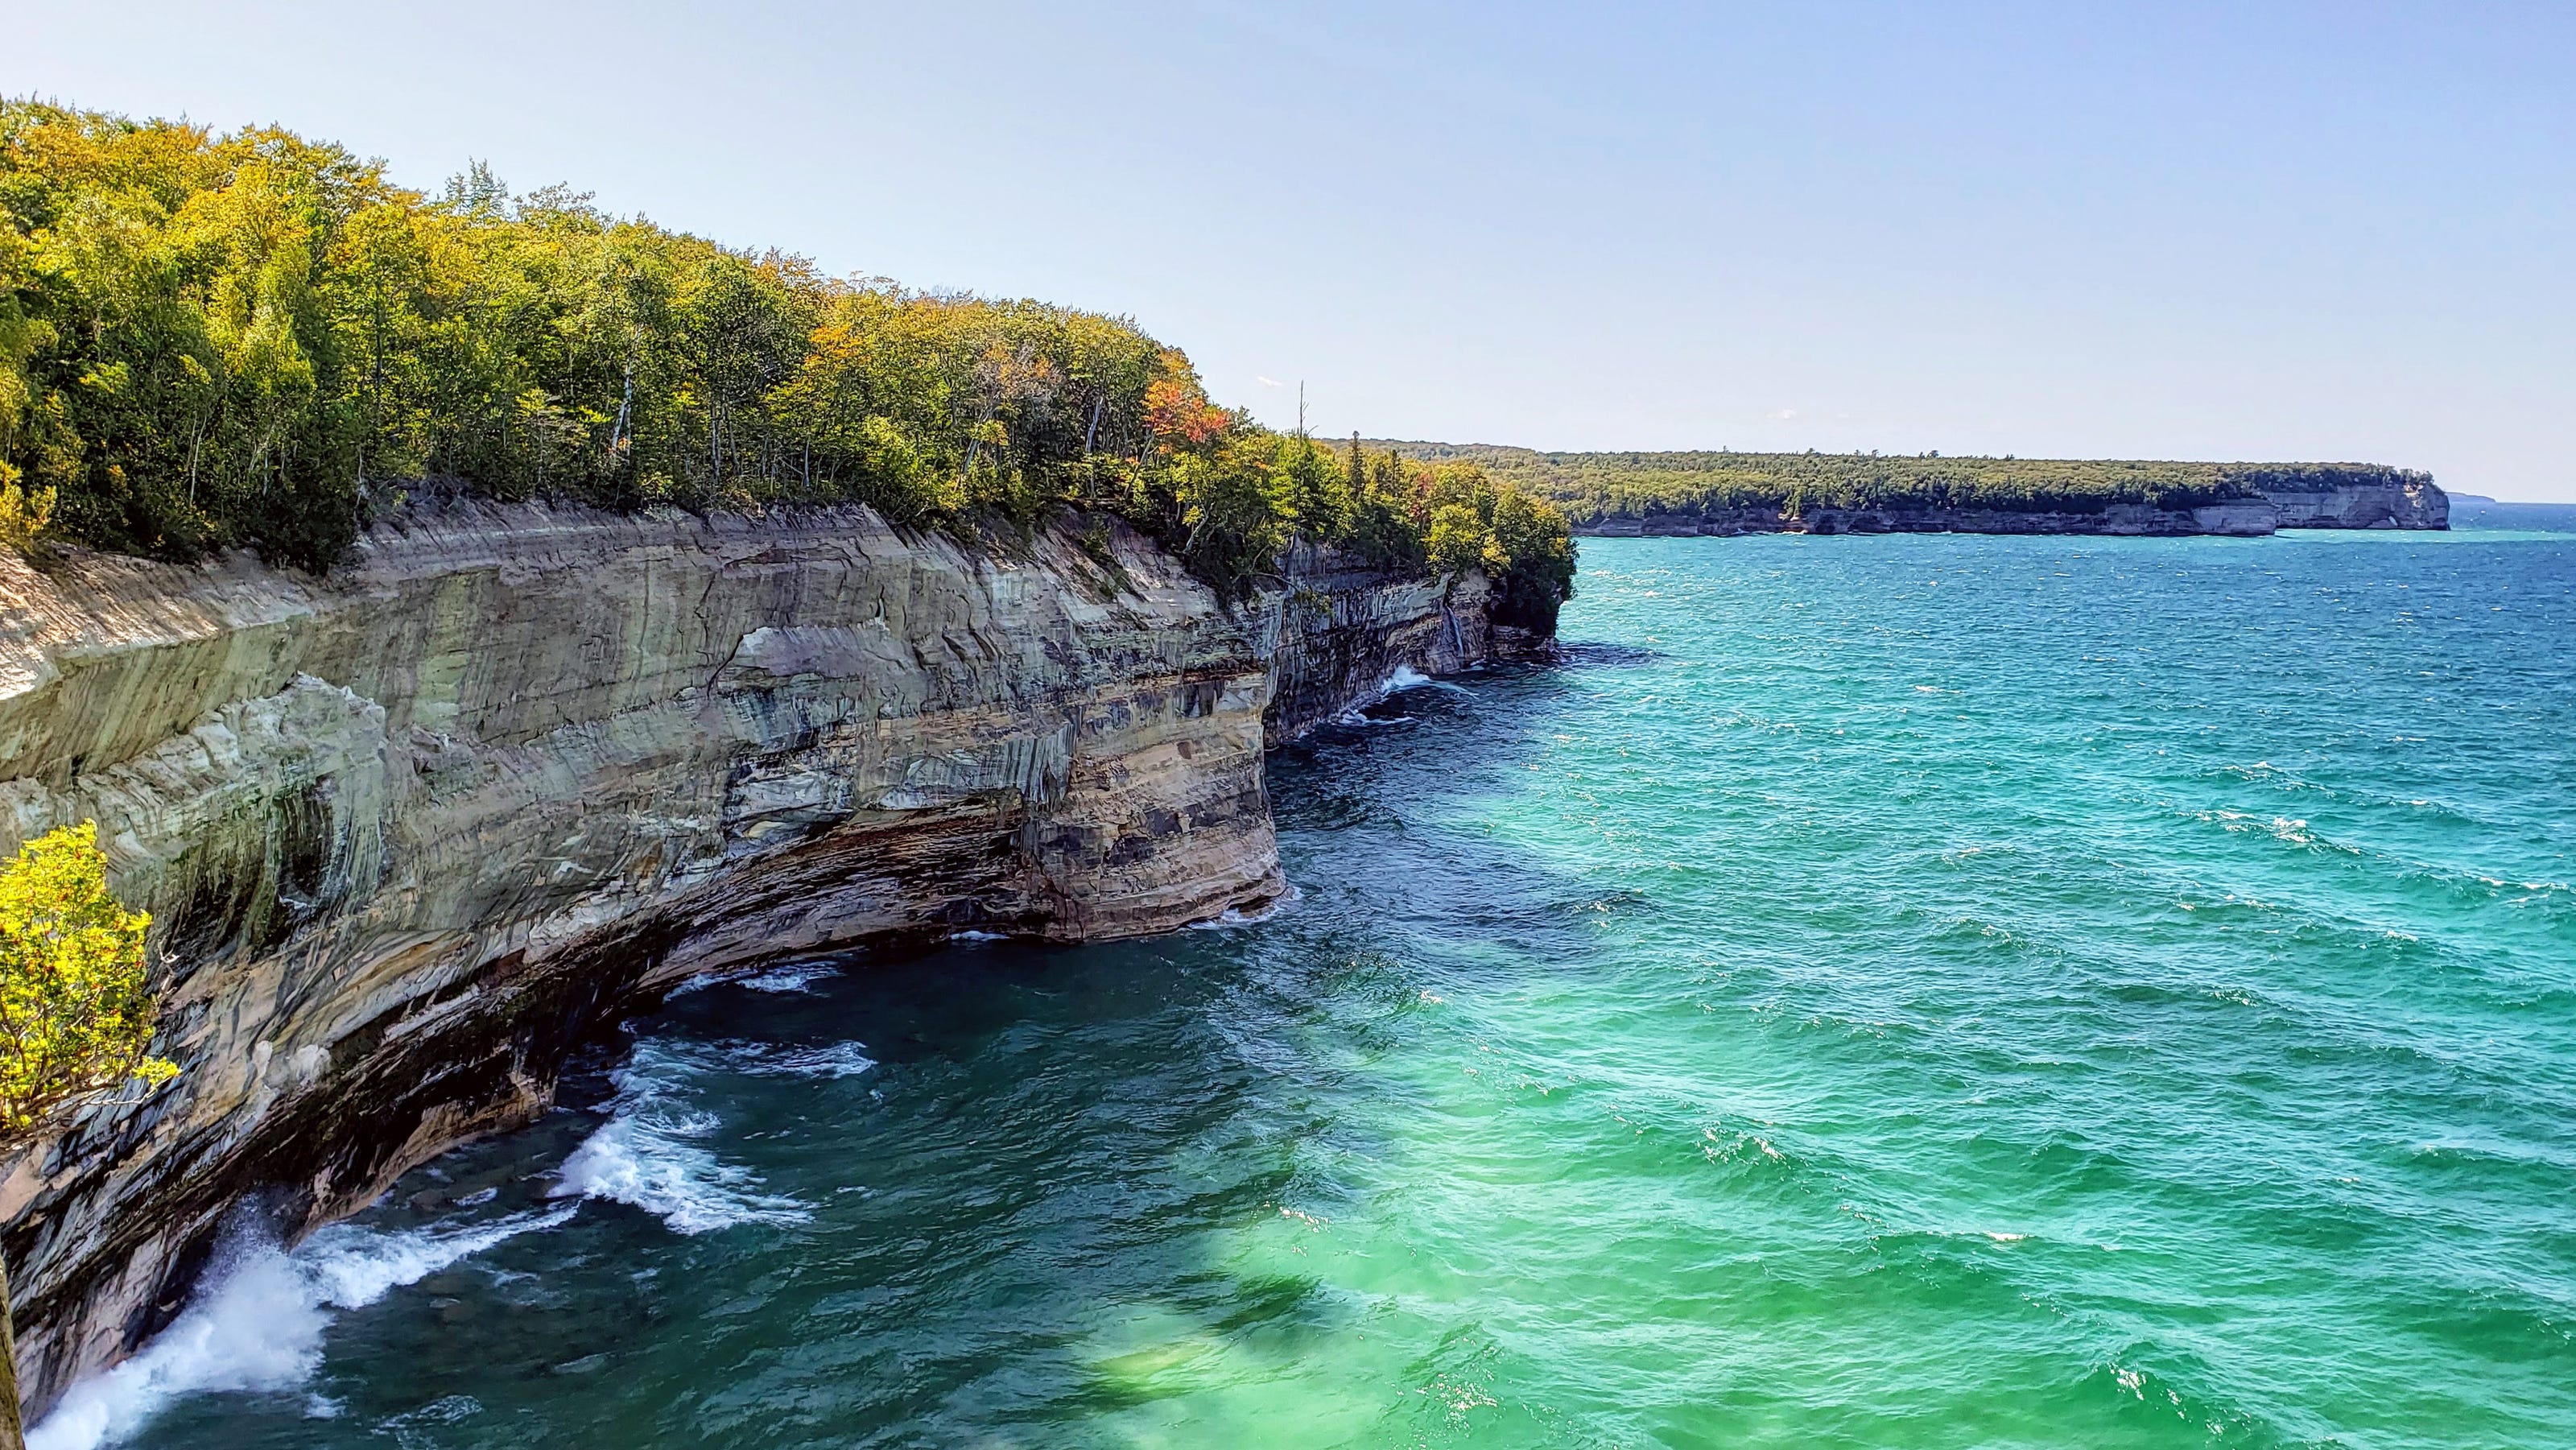 Backpacking in Pictured Rocks along Lake Superior delivers views of